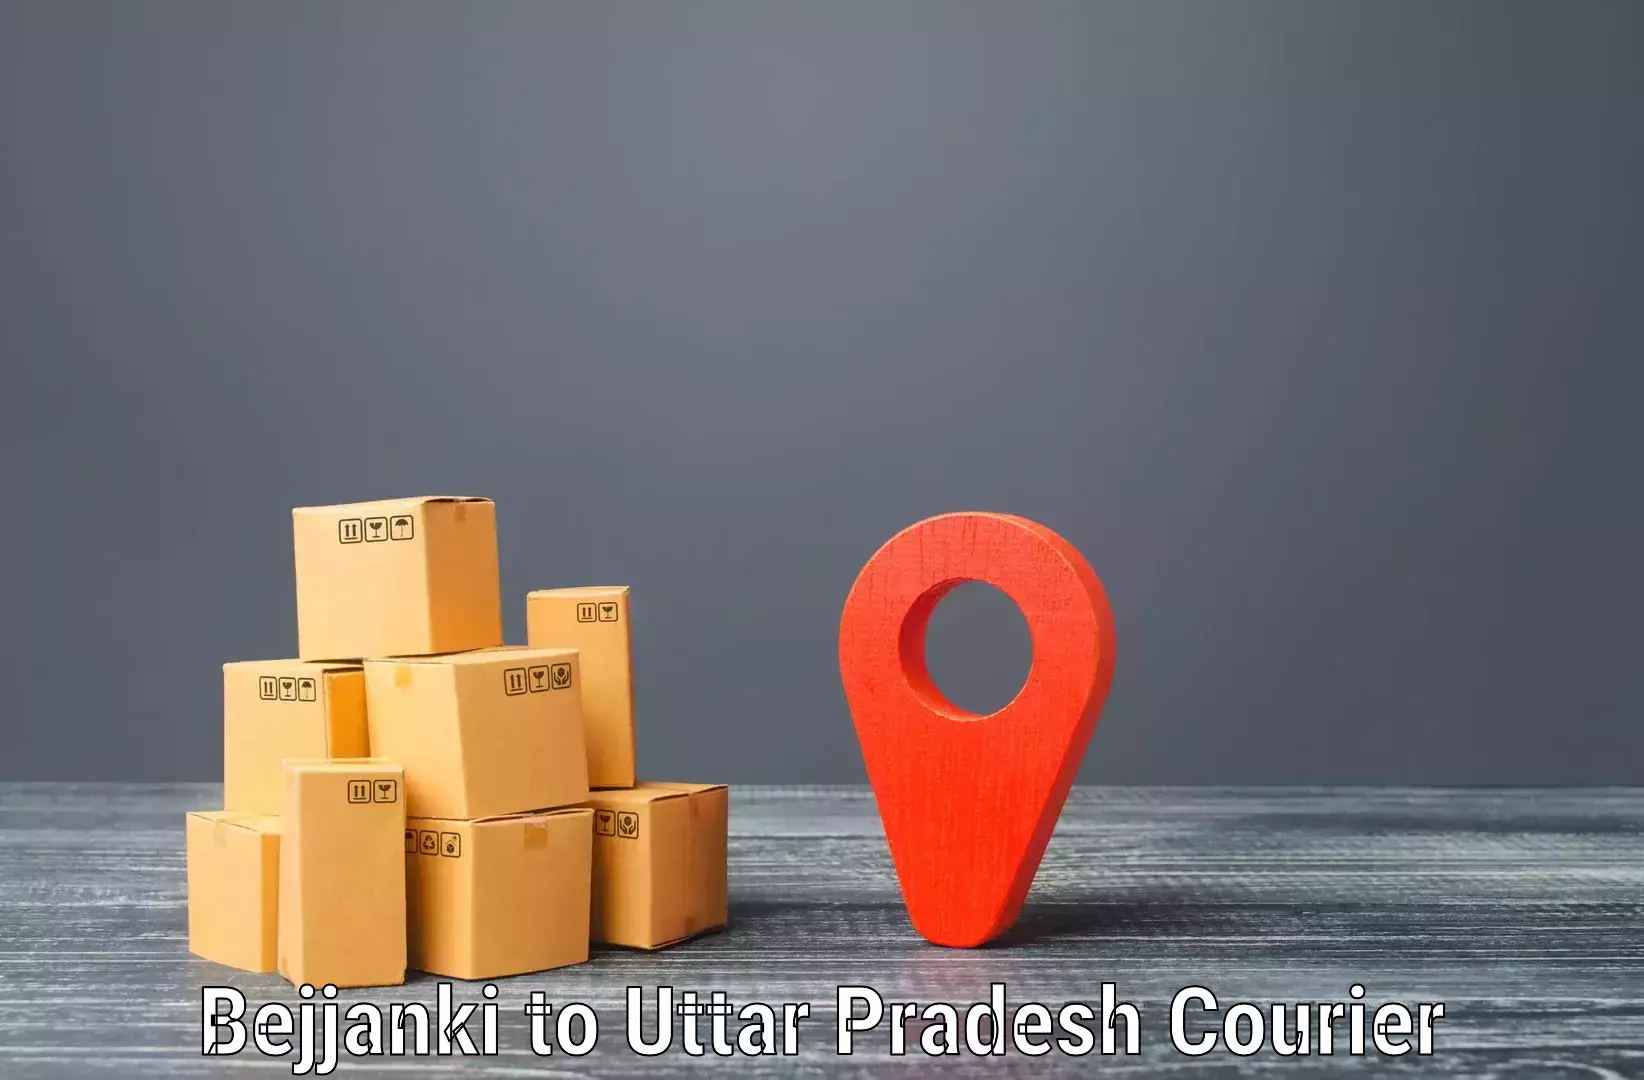 Courier insurance Bejjanki to Sultanpur